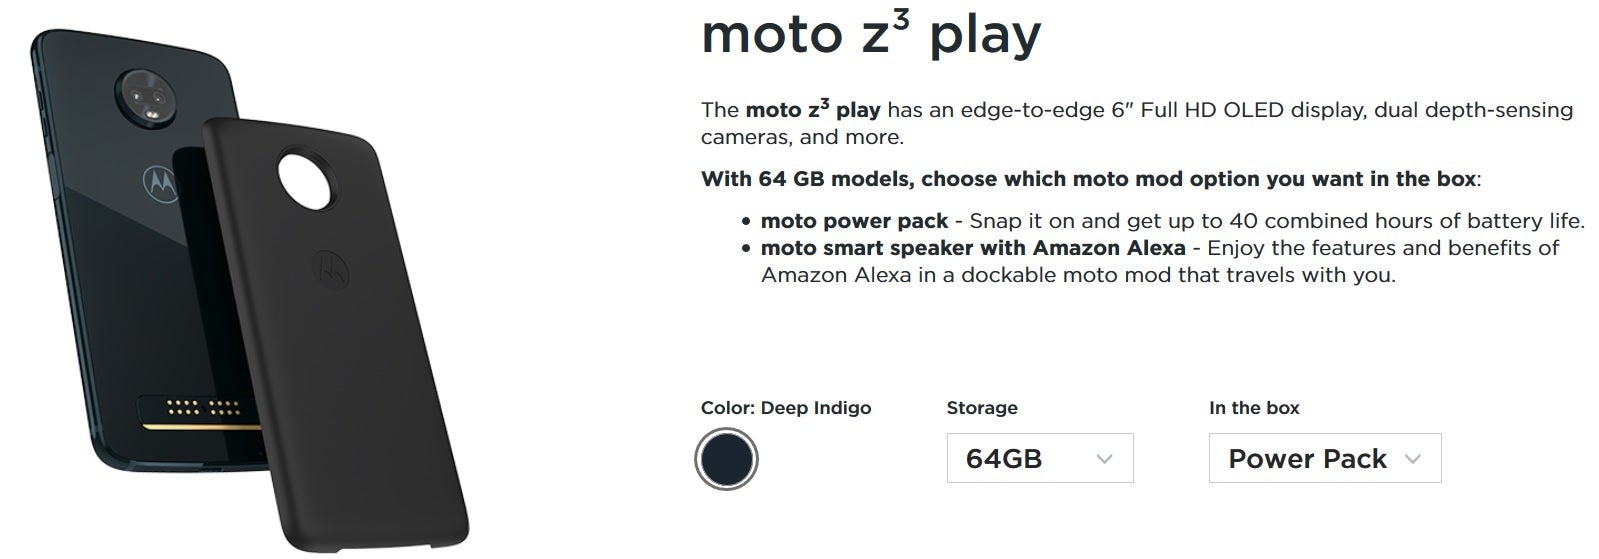 Save $250 or 45% on this Moto Z3 Play bundle - Motorola's bundle deal takes a whopping 45% off the 64GB Moto Z3 Play and the Alexa Moto Mod